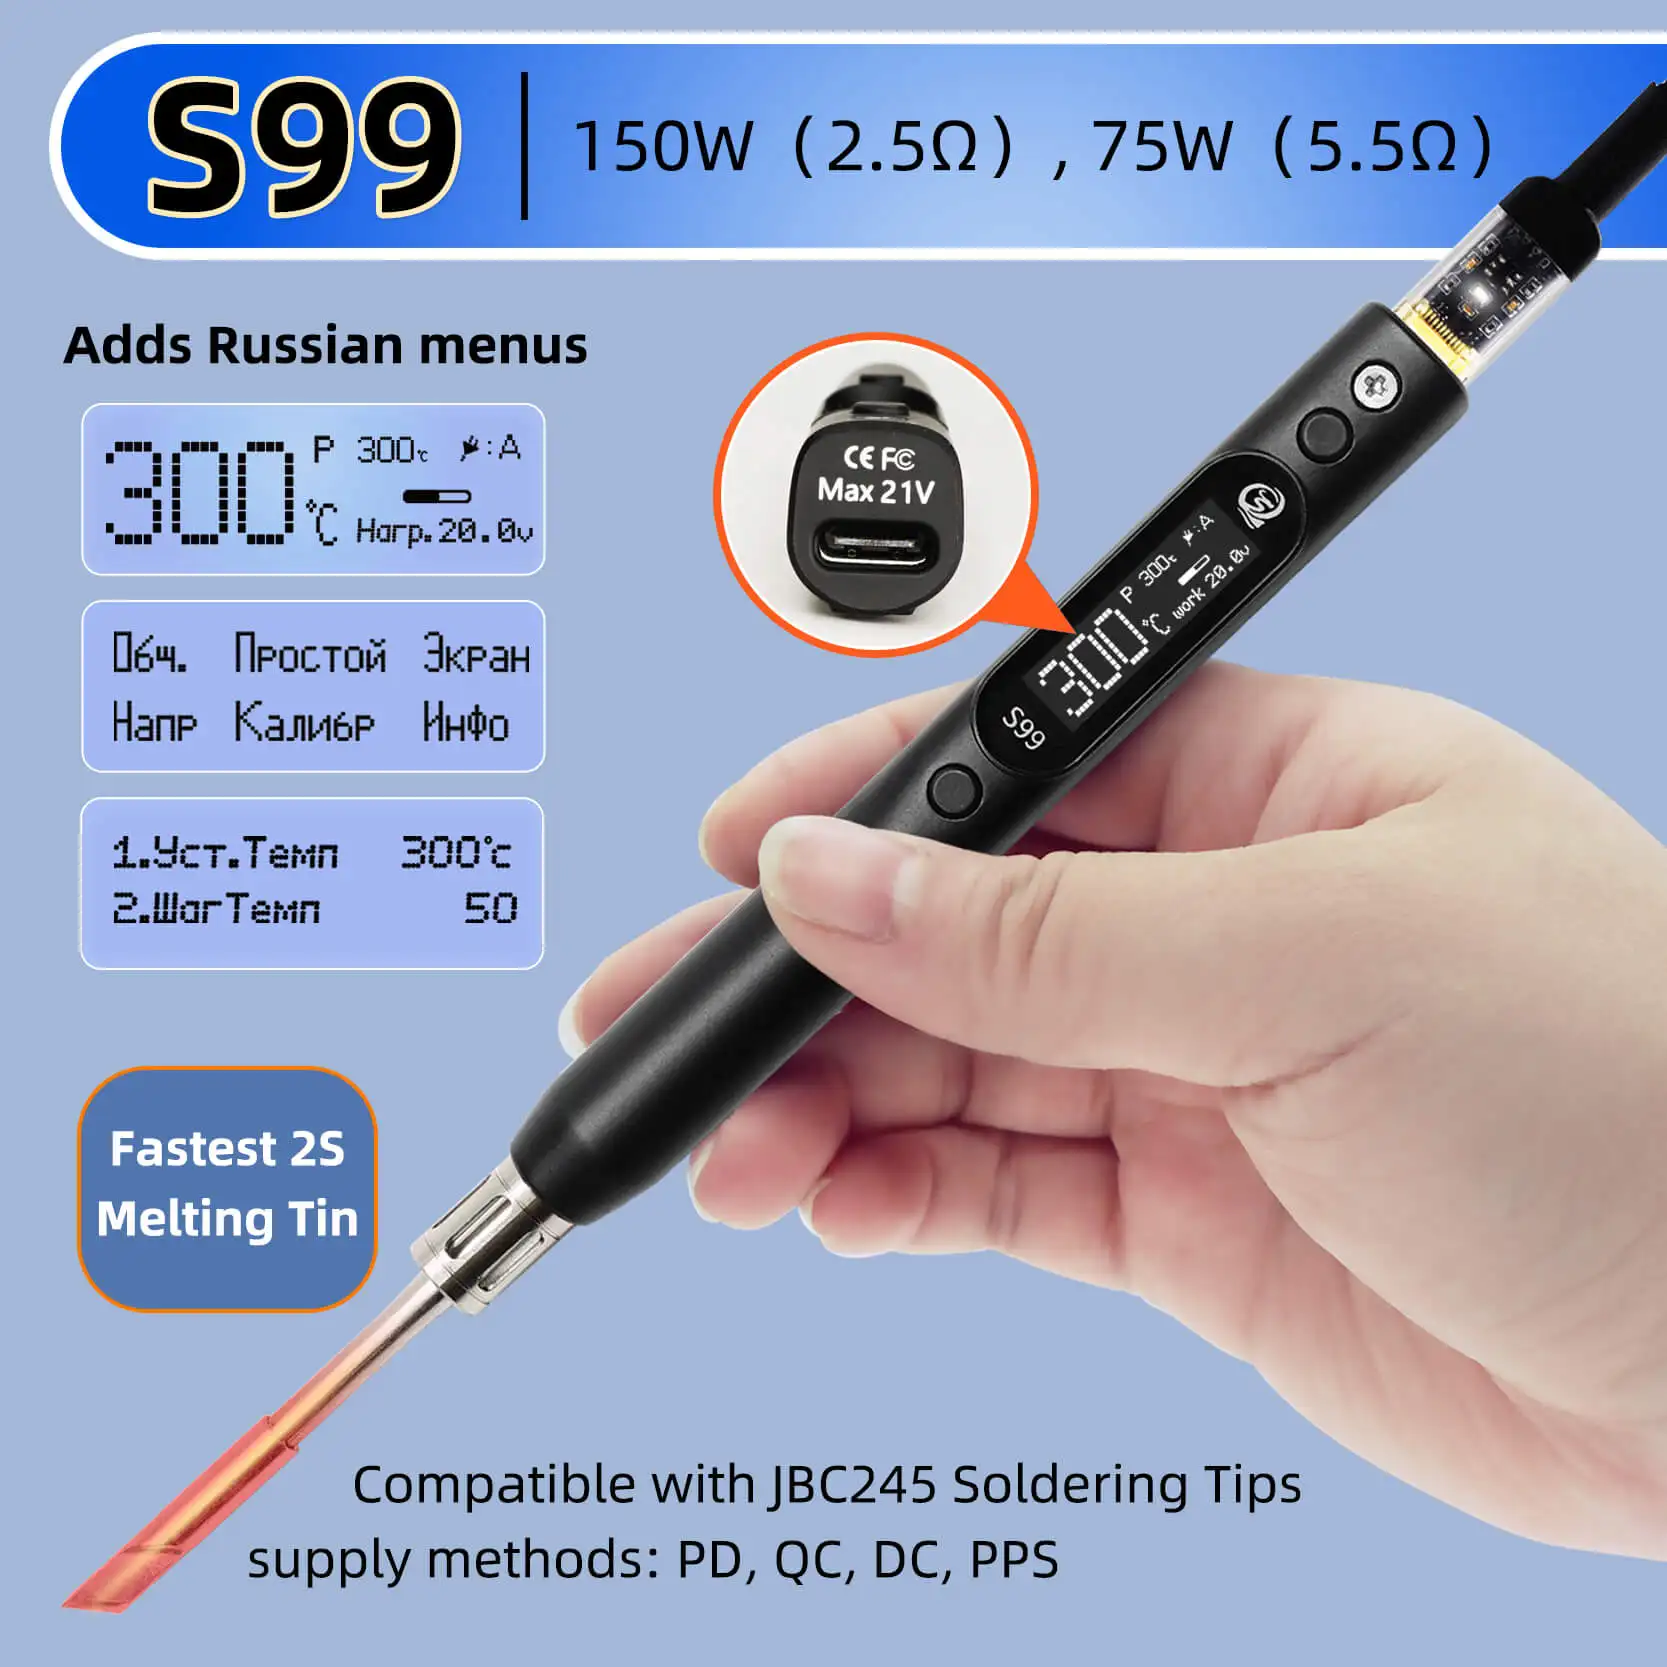 Sequre S99 Soldering Iron Compatible With Jbc245 Tip Support Pd|qc|dc|pps Power Supply For Drone Rc Model Welding Repair Tool